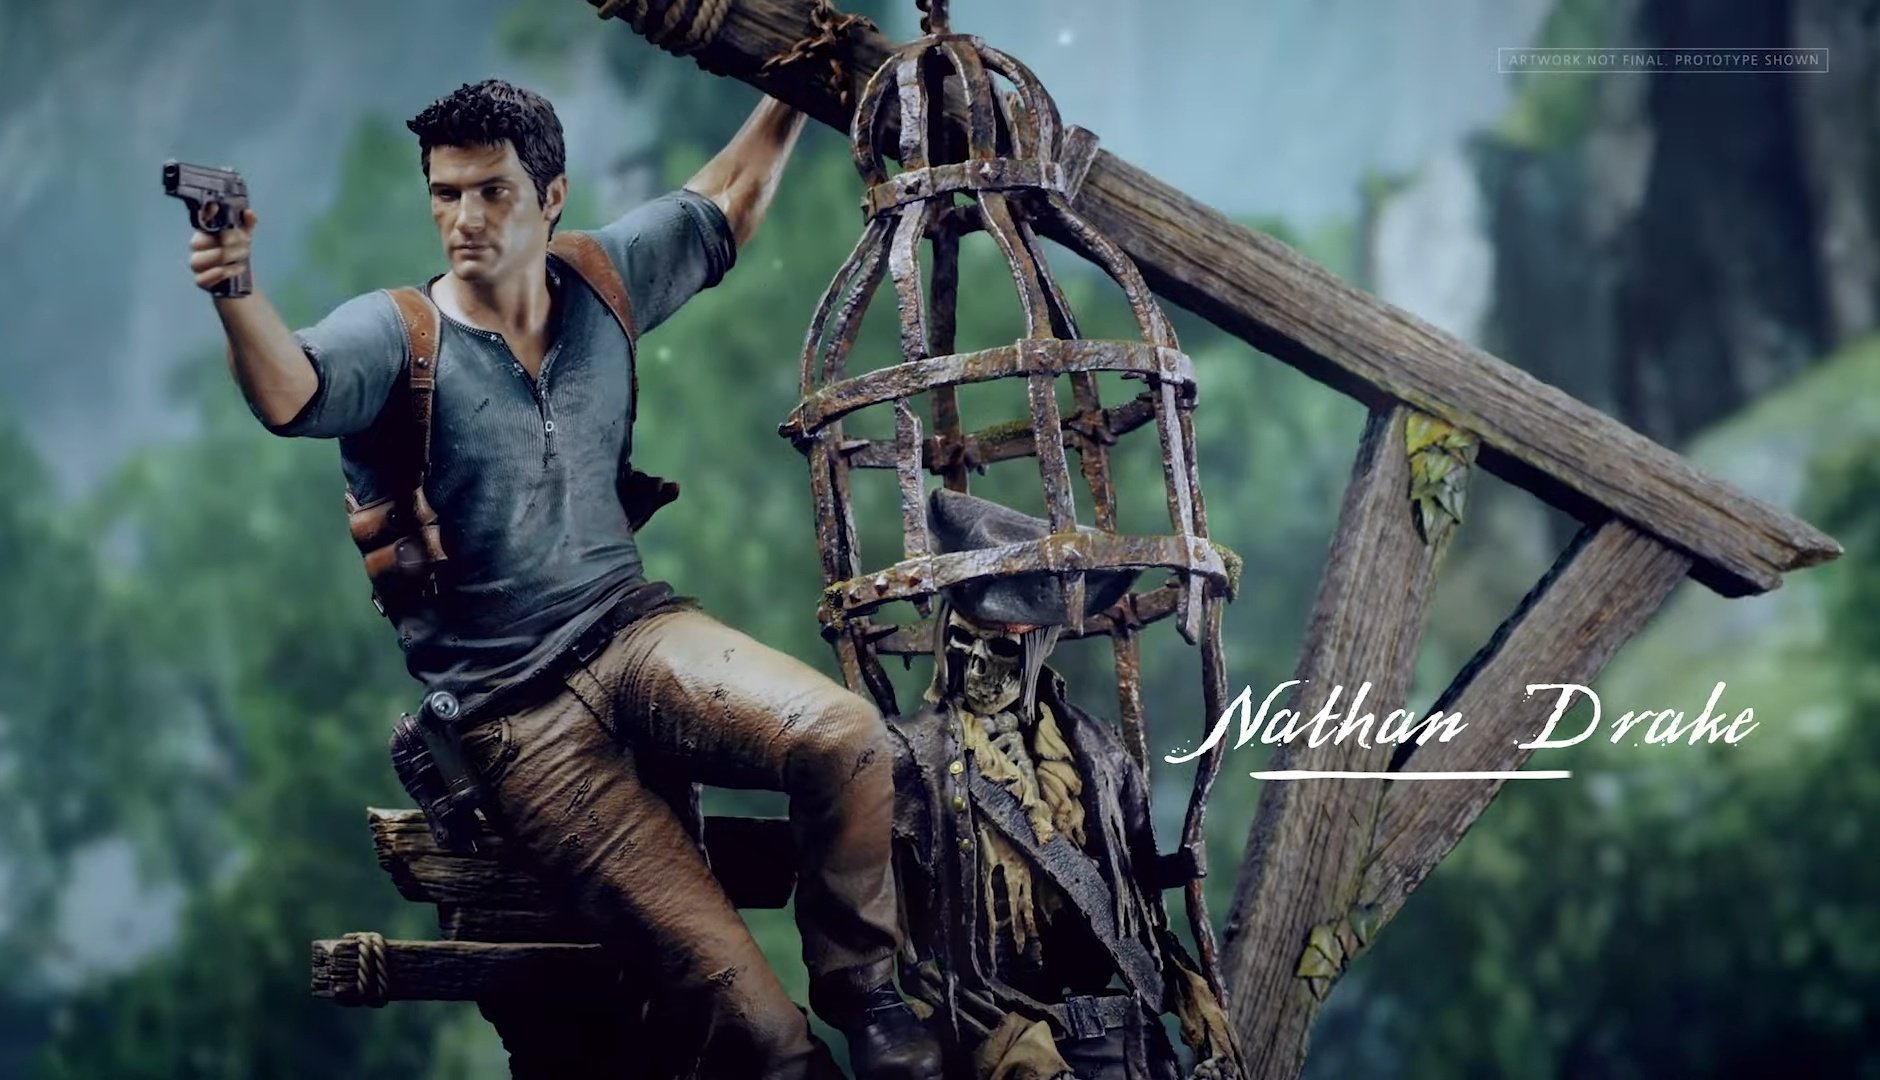 Uncharted 4: A Thief's End - Nathan Drake Statue by Prime 1 Studio